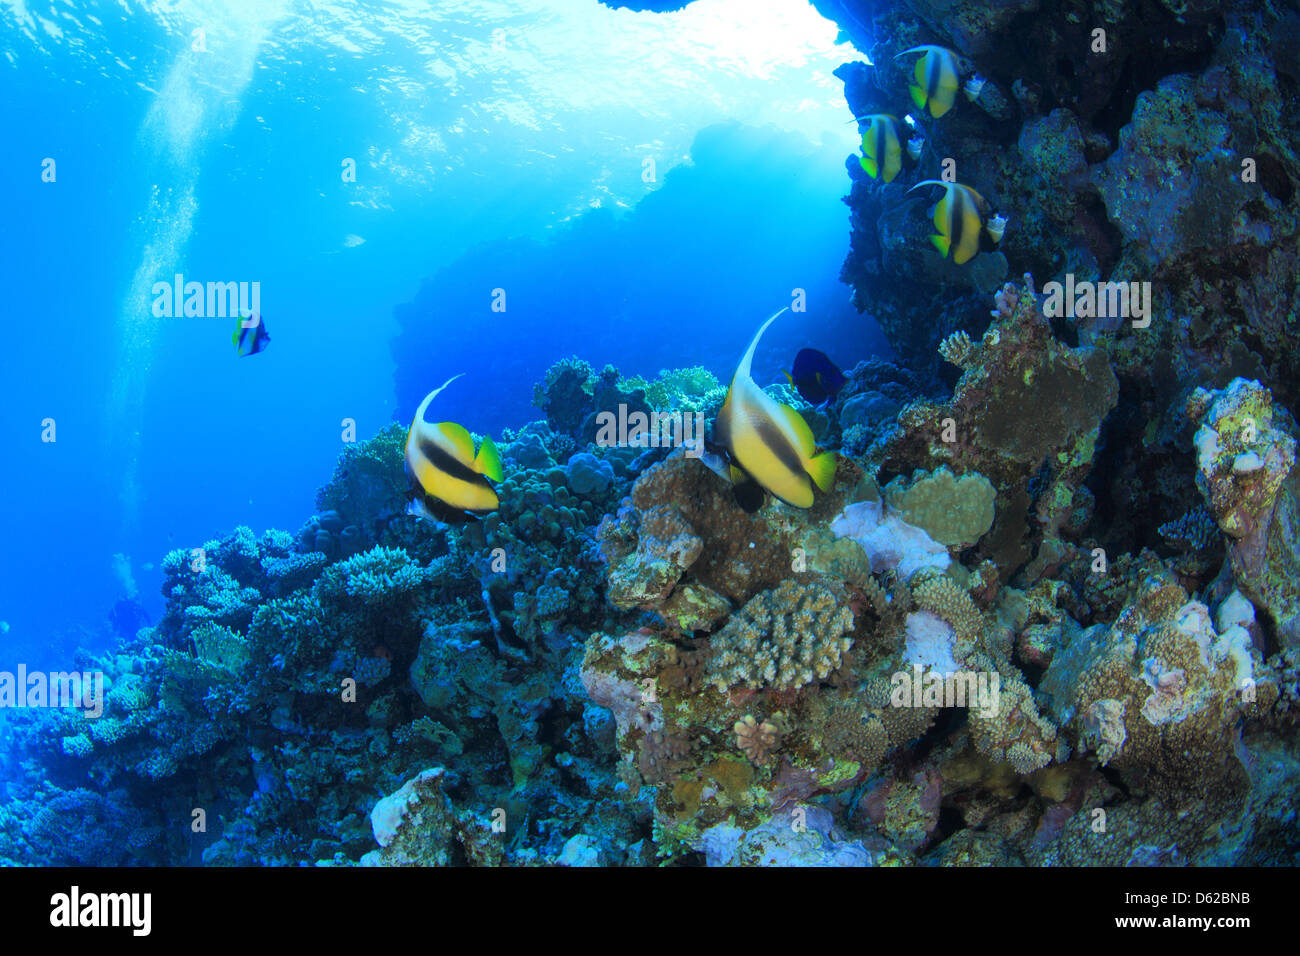 Marine Life in the Red Sea Stock Photo